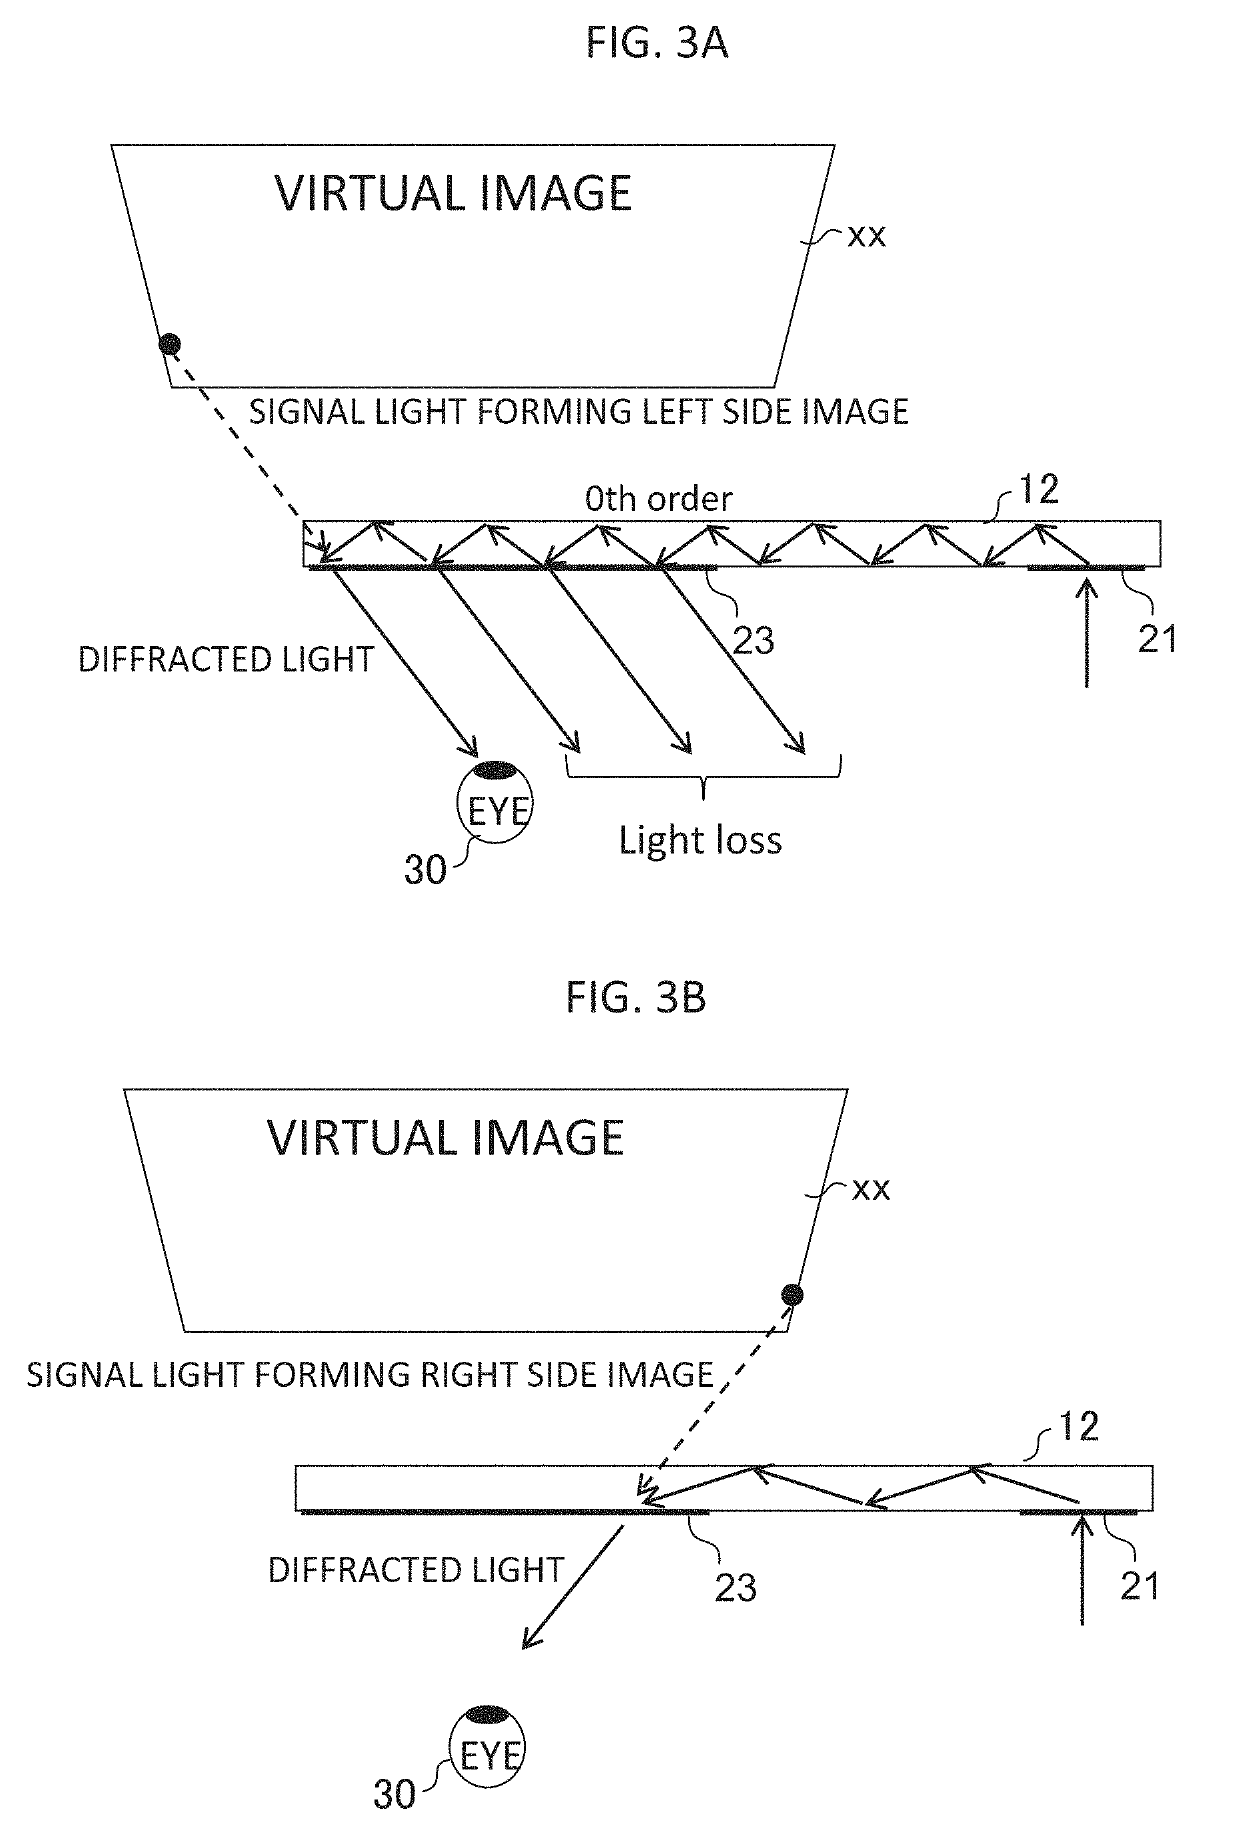 Imageguide for head mounted display